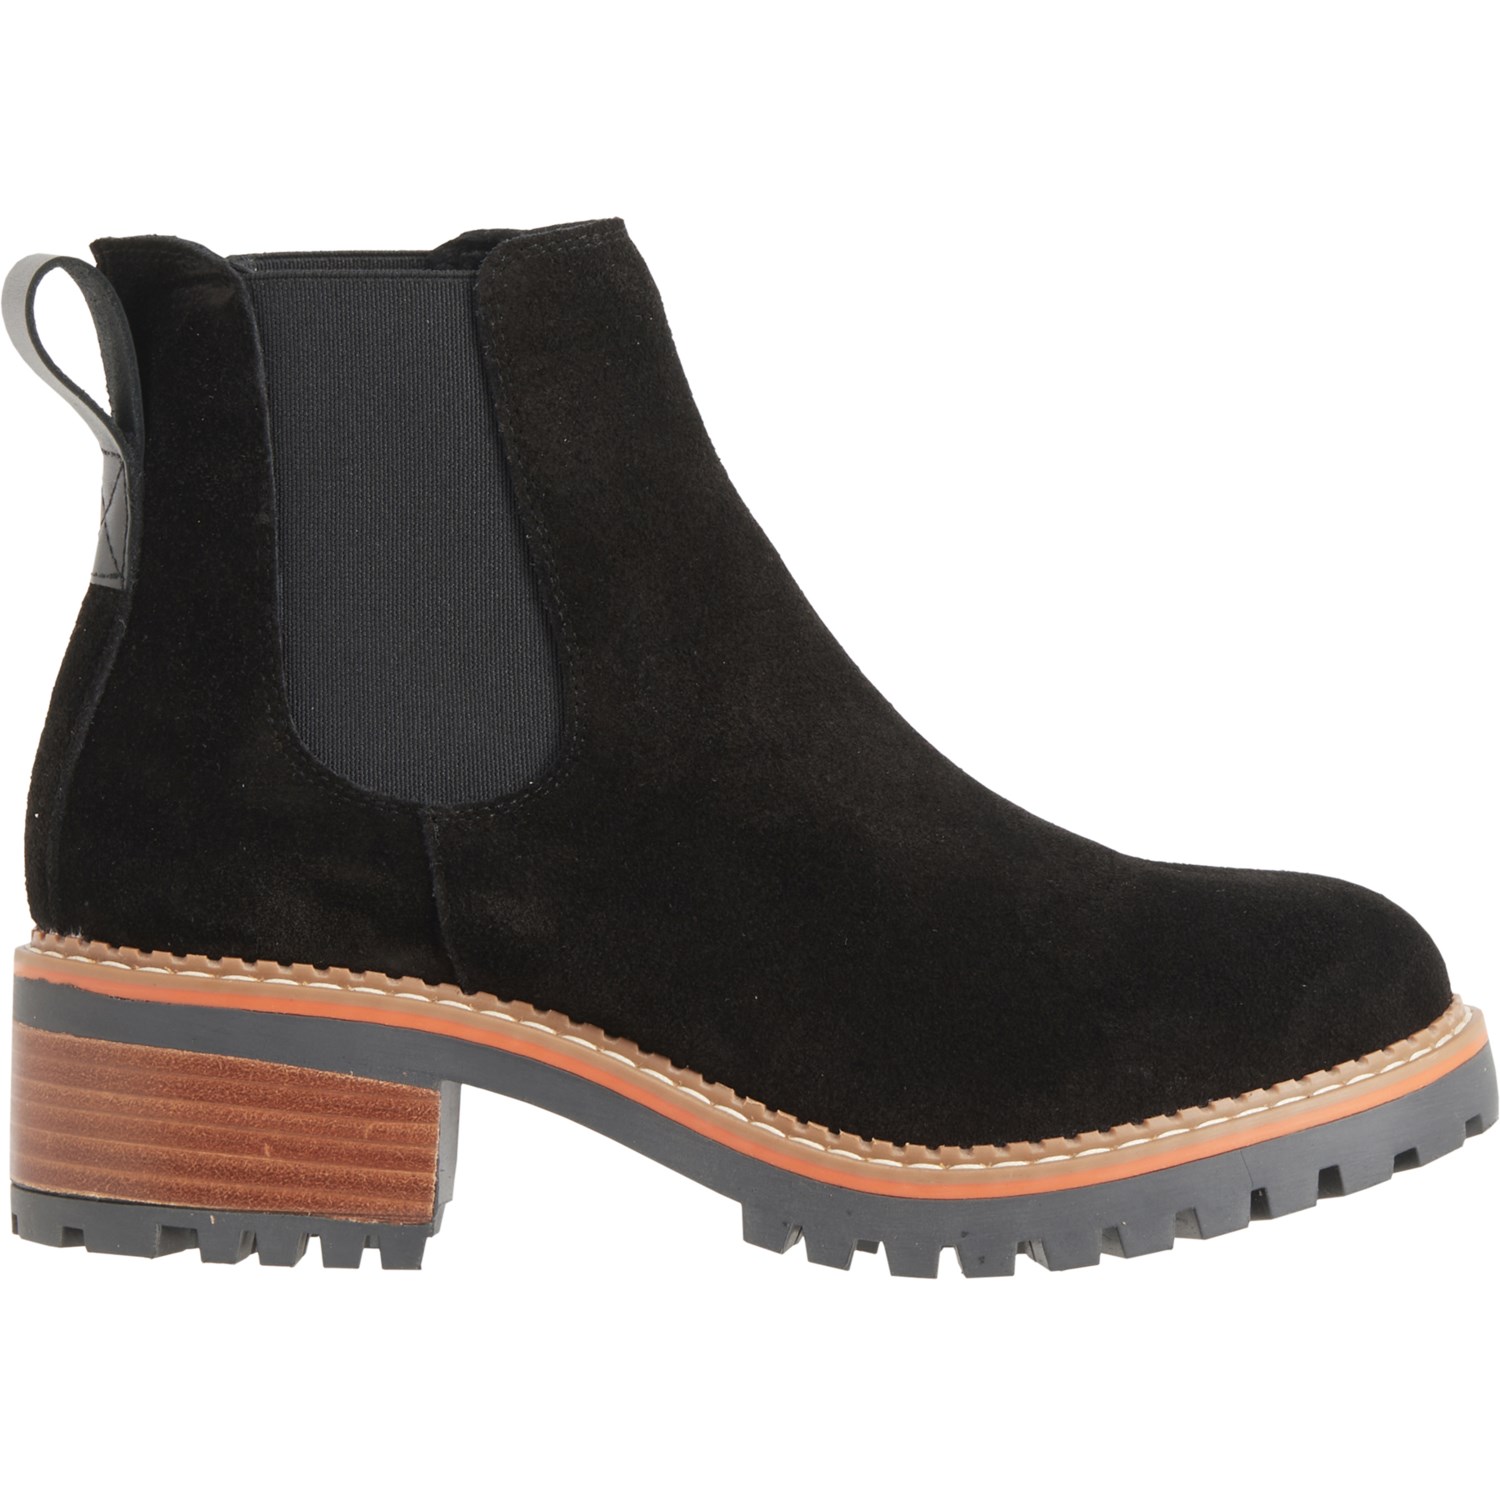 BERTUCHI Made in Spain Chelsea Boots (For Women) - Save 40%